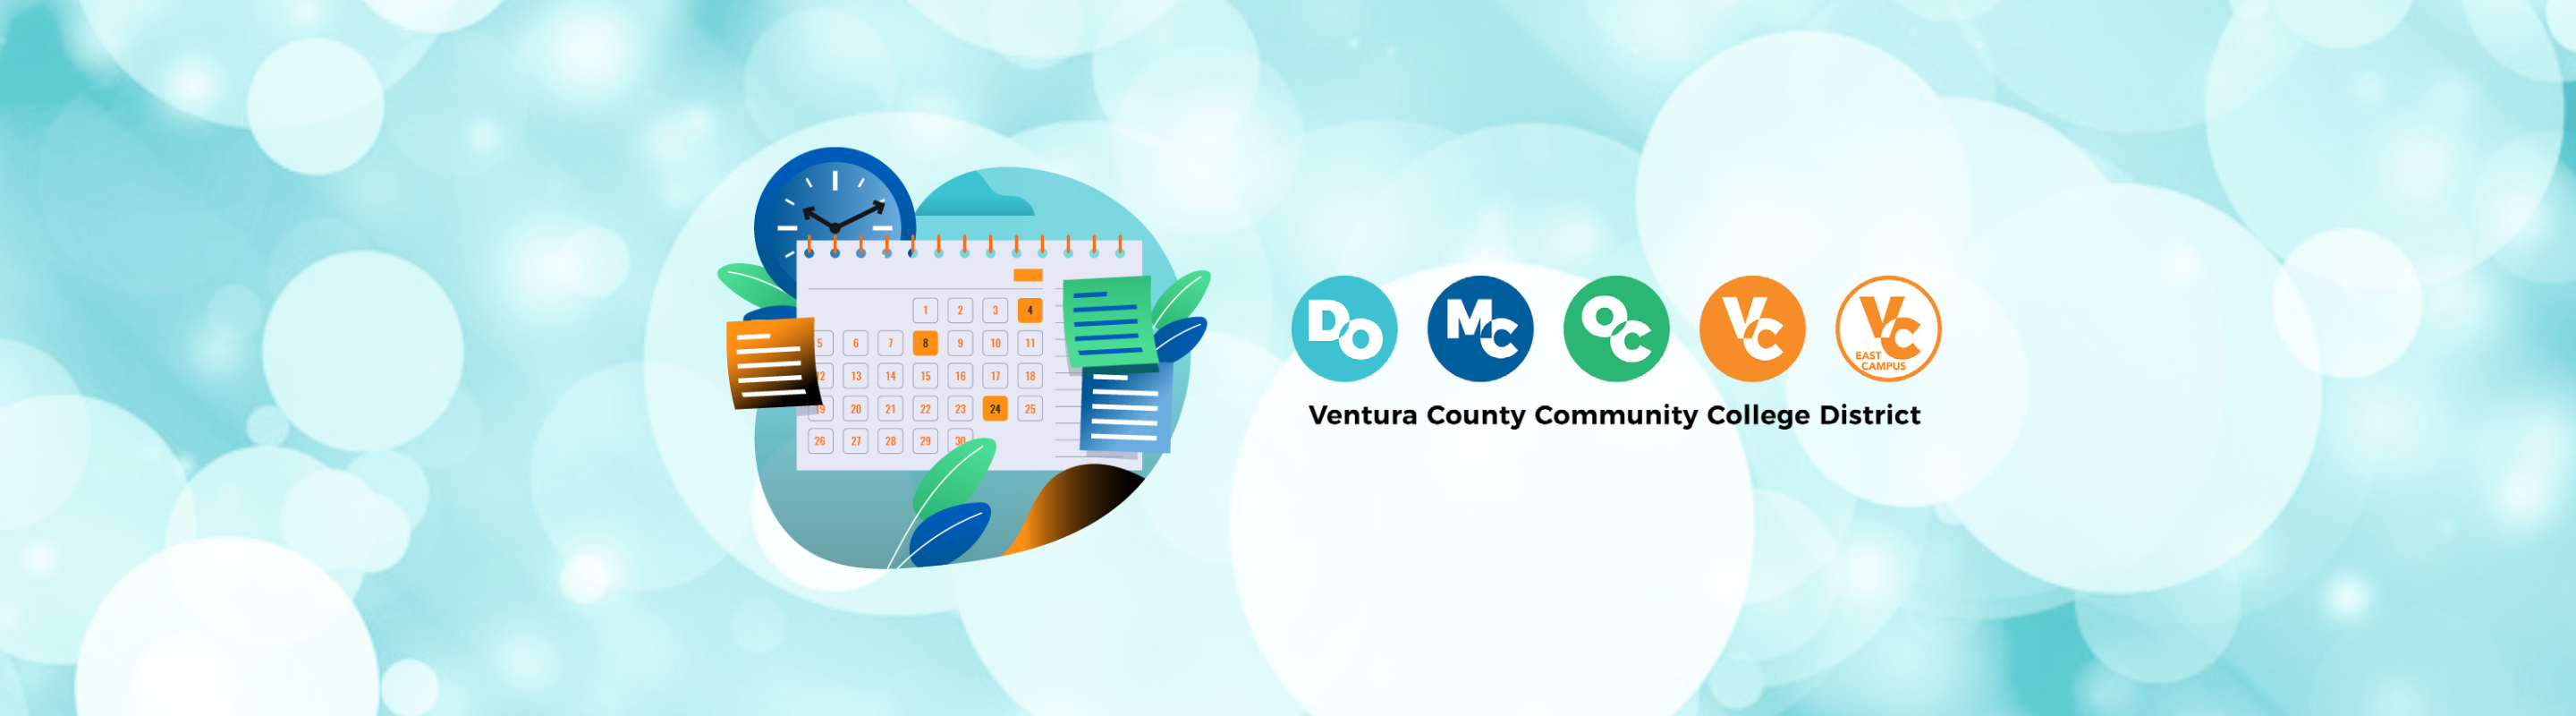 Illustration of a calendar with sticky notes, a clock, and plants. Text that reads: DO, MC, OC, VC, VC East Campus. Ventura County Community College District.